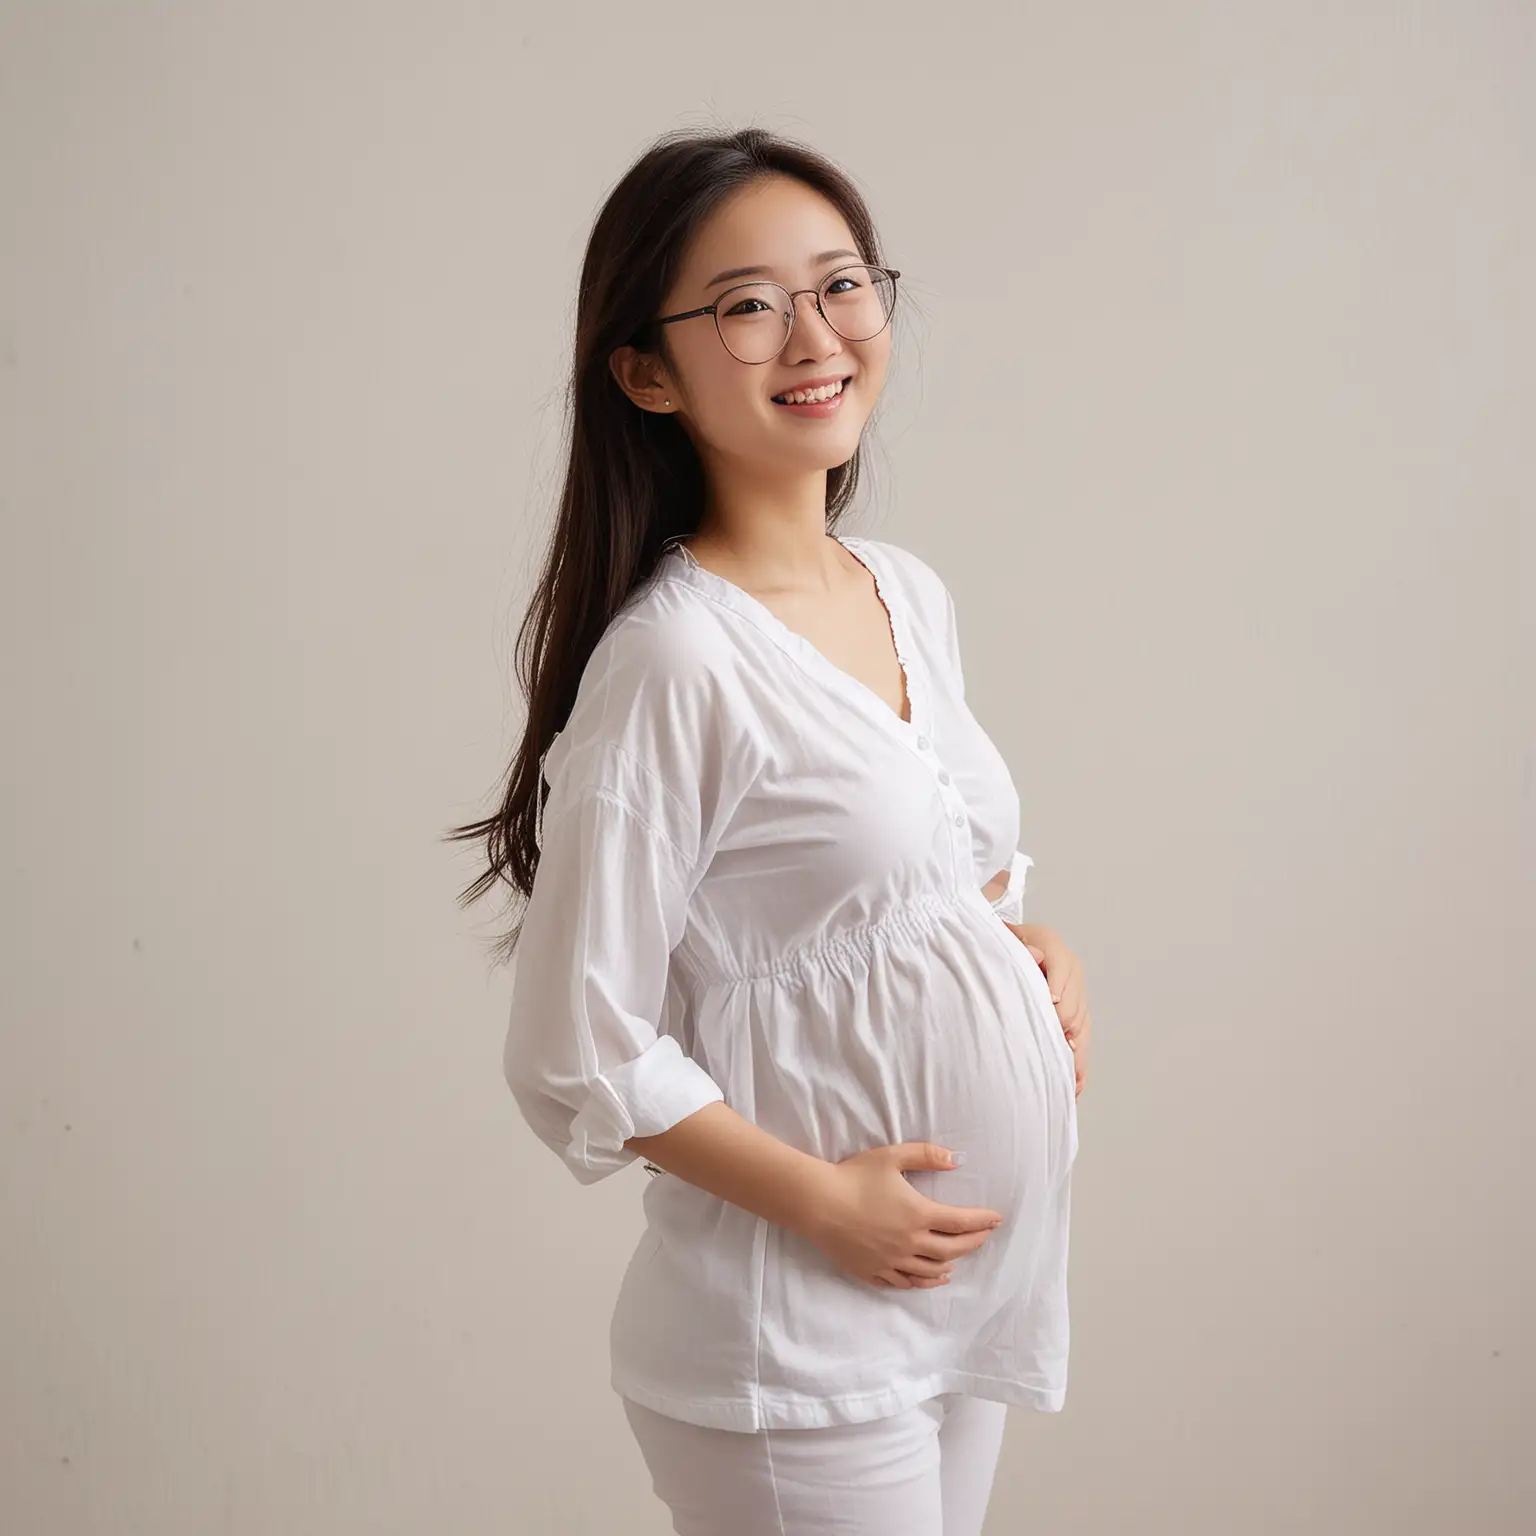 Chinese girl, pregnant, bulged belly, wearing white clothes, wearing glasses, long hair, sunny smile, side profile